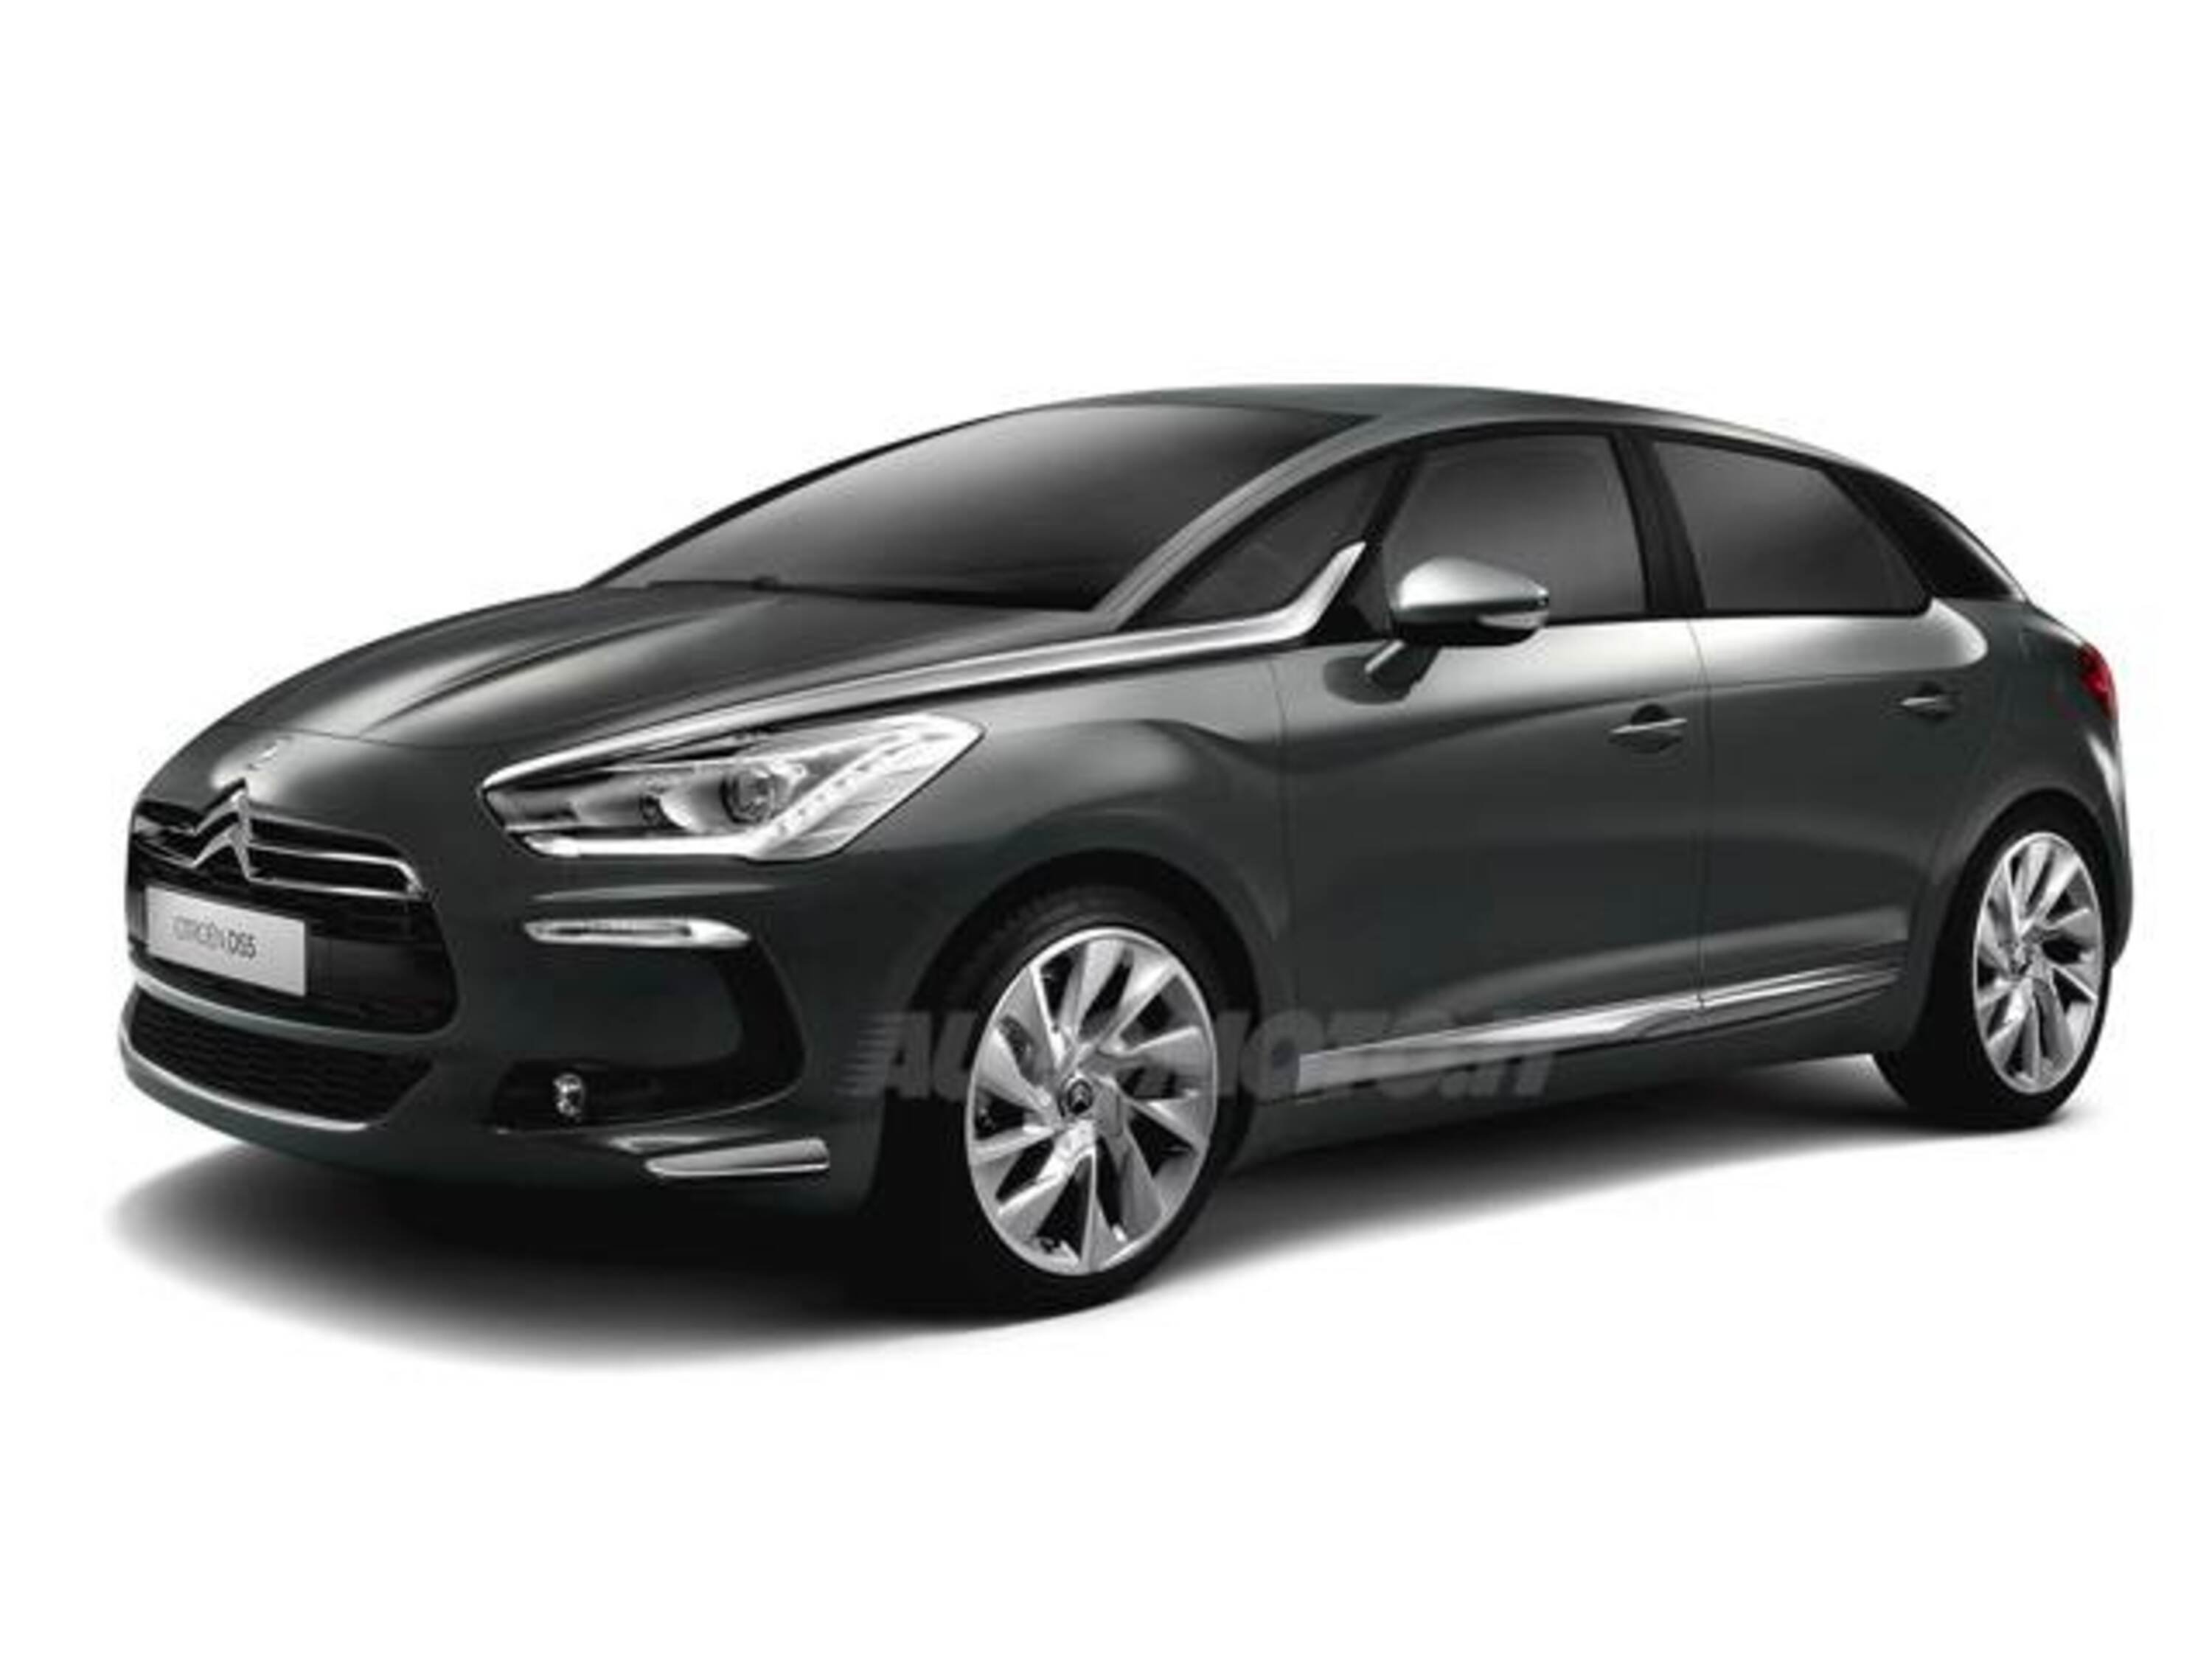 Ds DS 5 DS 5 1.6 e-HDi 115 airdream CMP6 Chic 